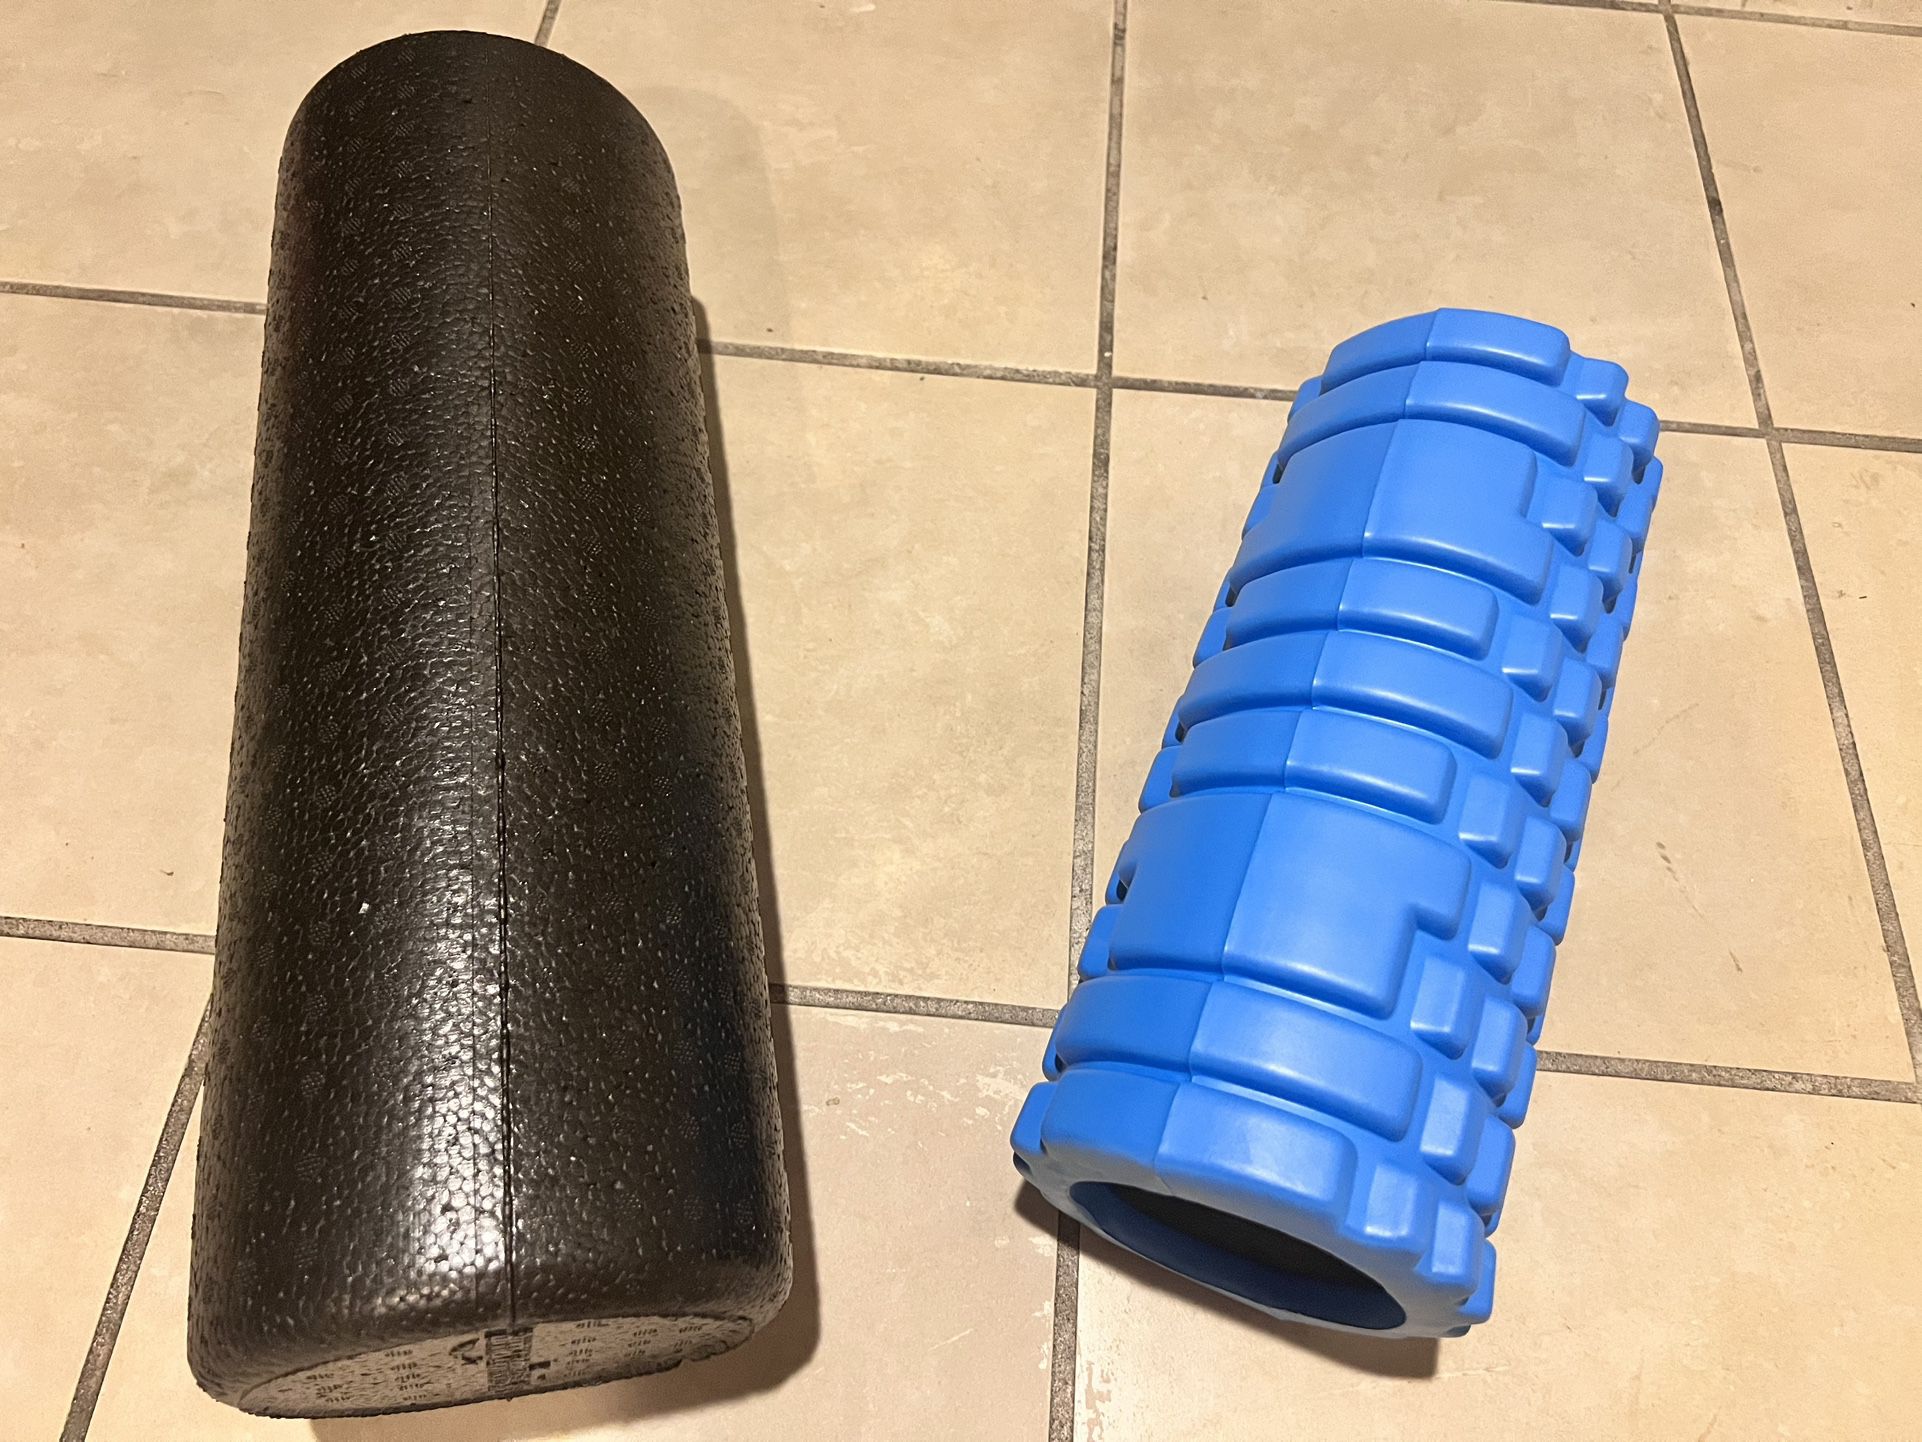 Set of Two Gym Workout Rollers For Exercise   Black 18 inch Amazon Basics High-Density Round Foam Roller for Exercise, Massage, Muscle Recovery L 18” 